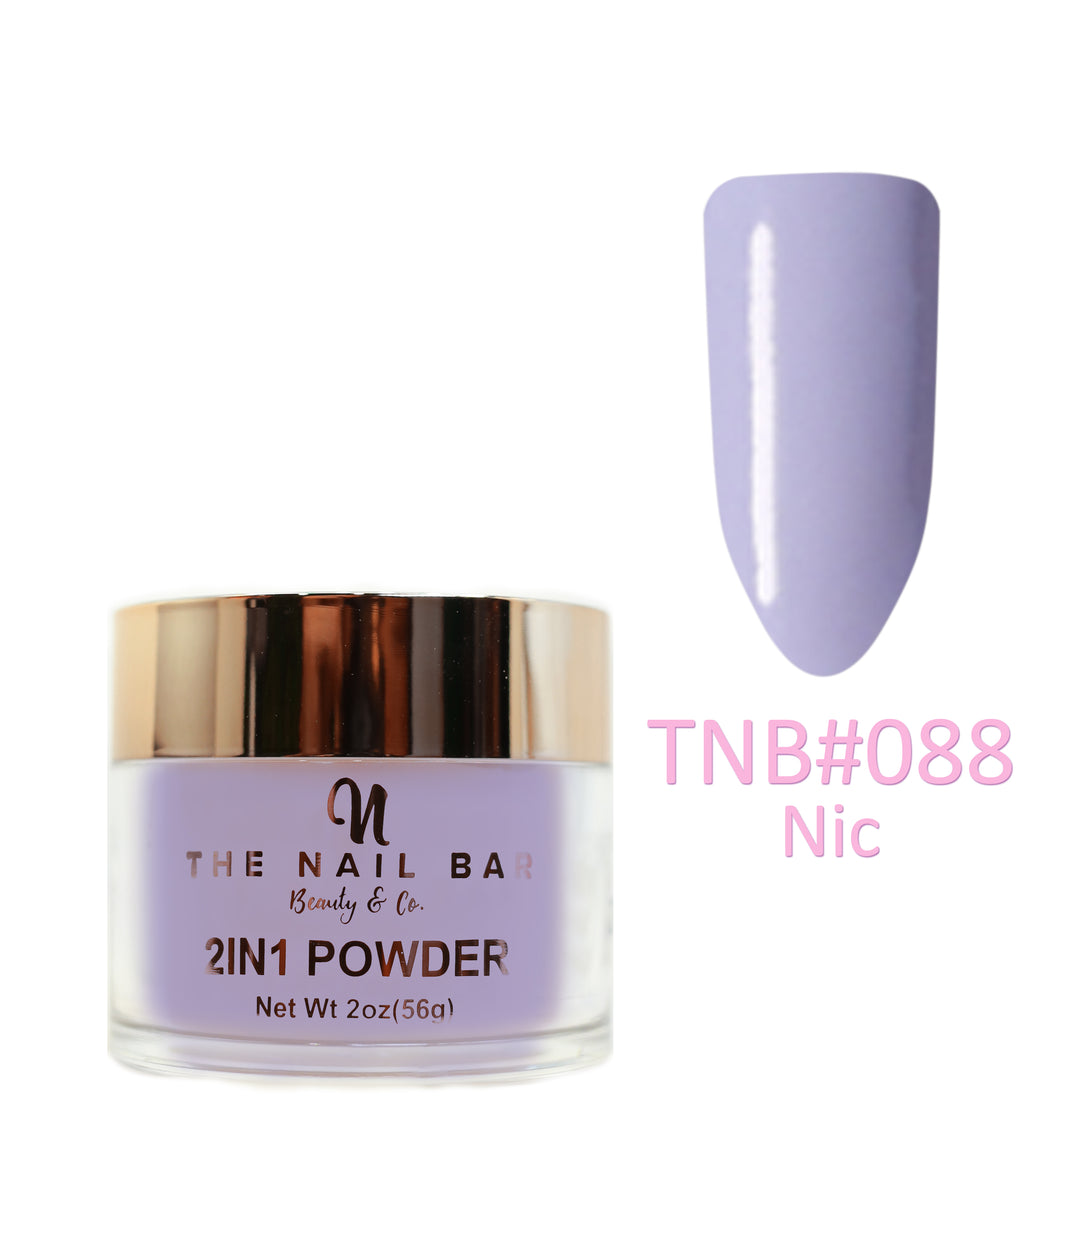 2-In-1 Dipping/Acrylic colour powder (2oz) -Nic - The Nail Bar Beauty & Co.